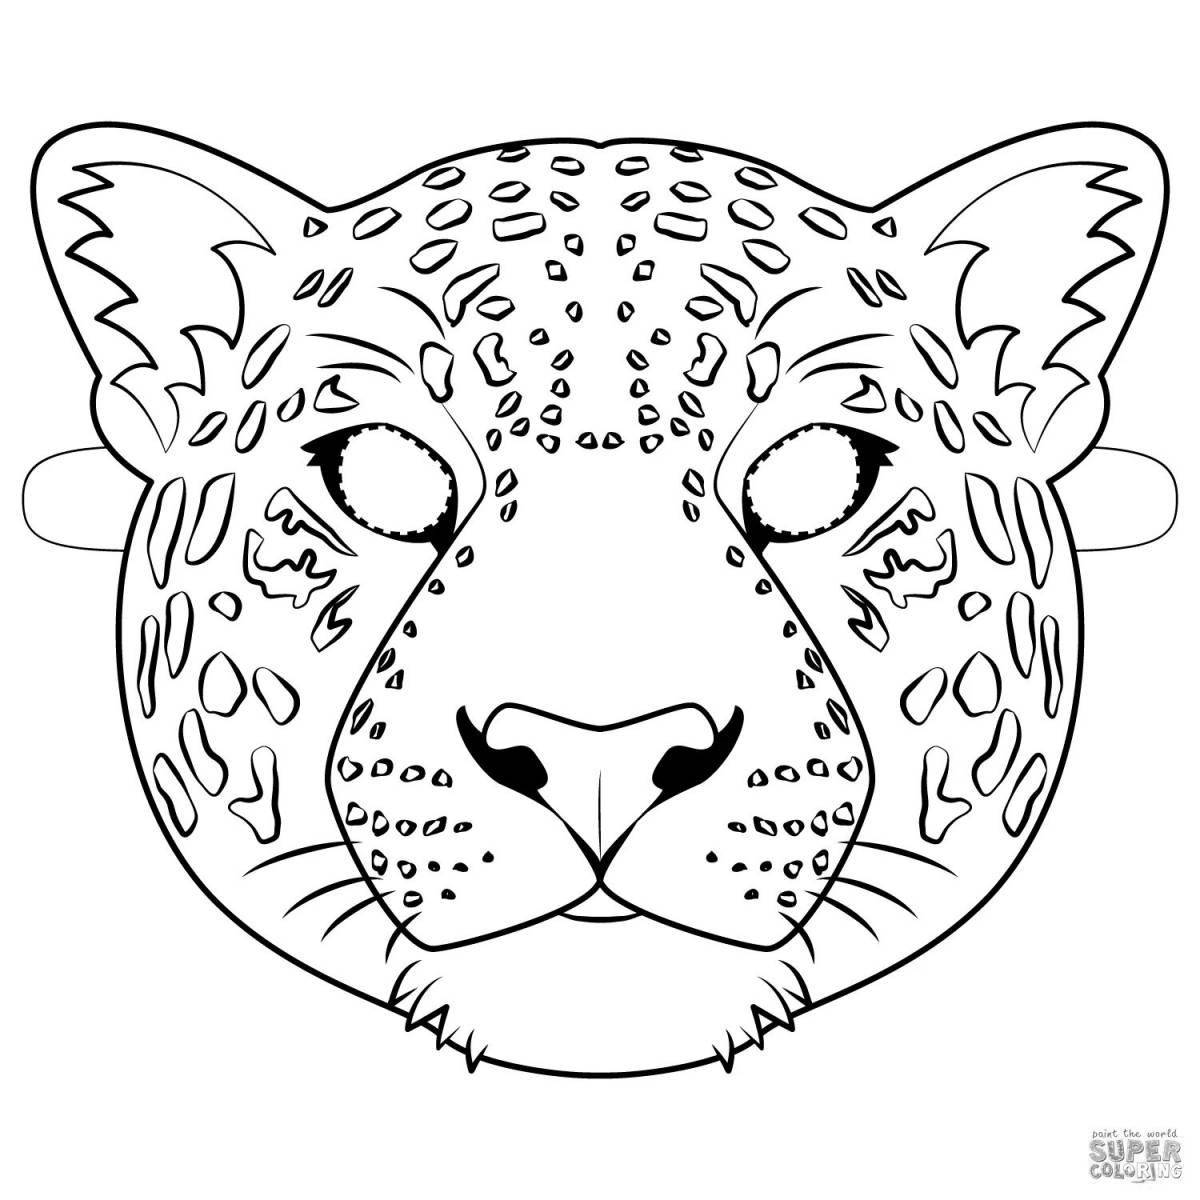 Cunning badger coloring page